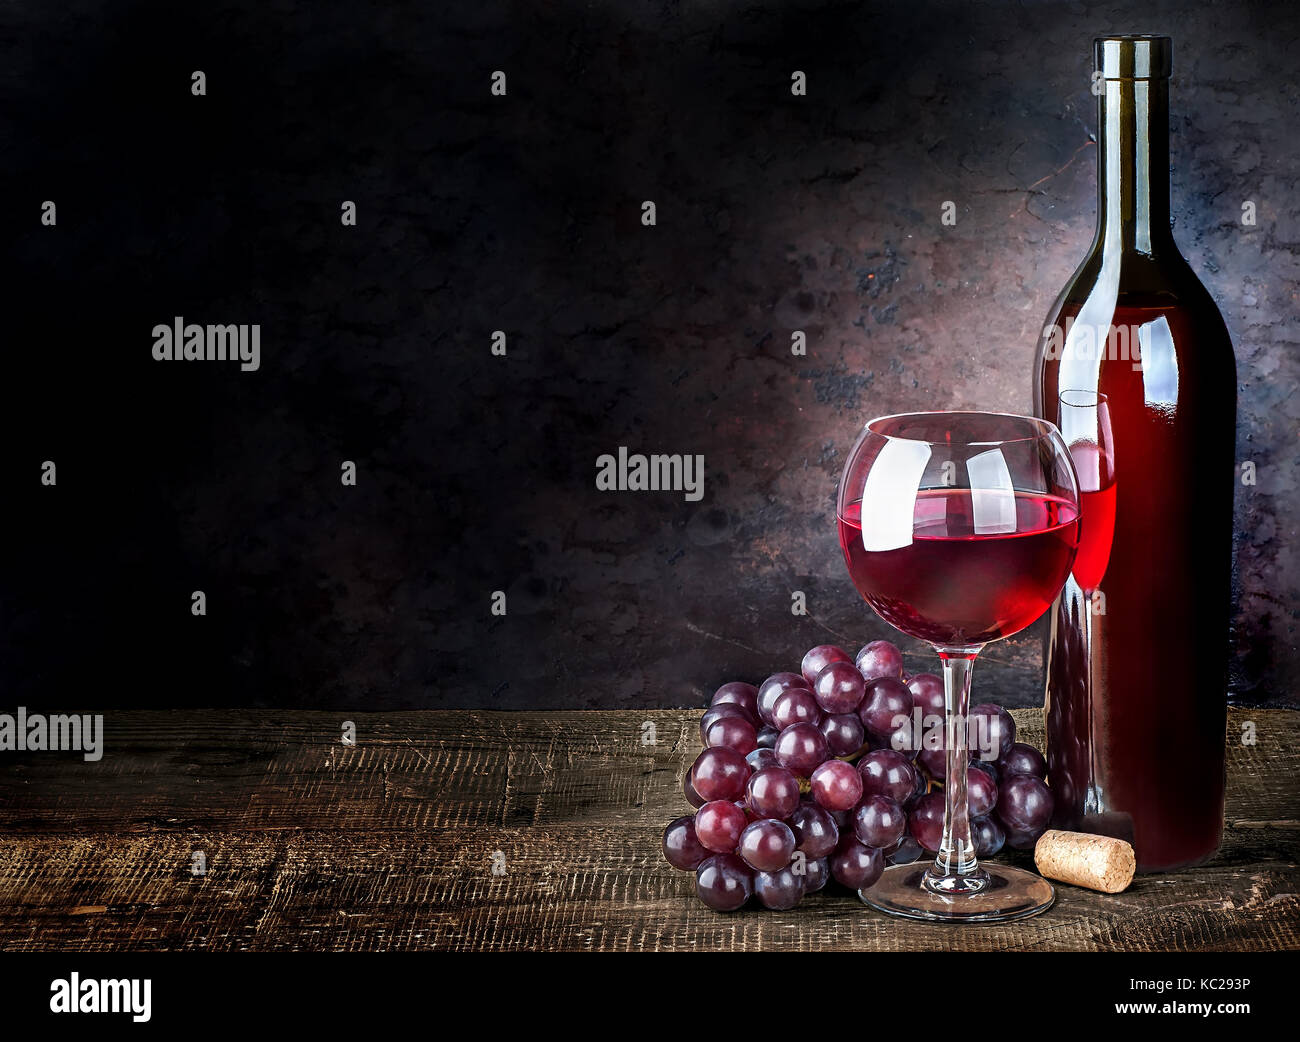 Glass of red wine with grapes and bottle Stock Photo